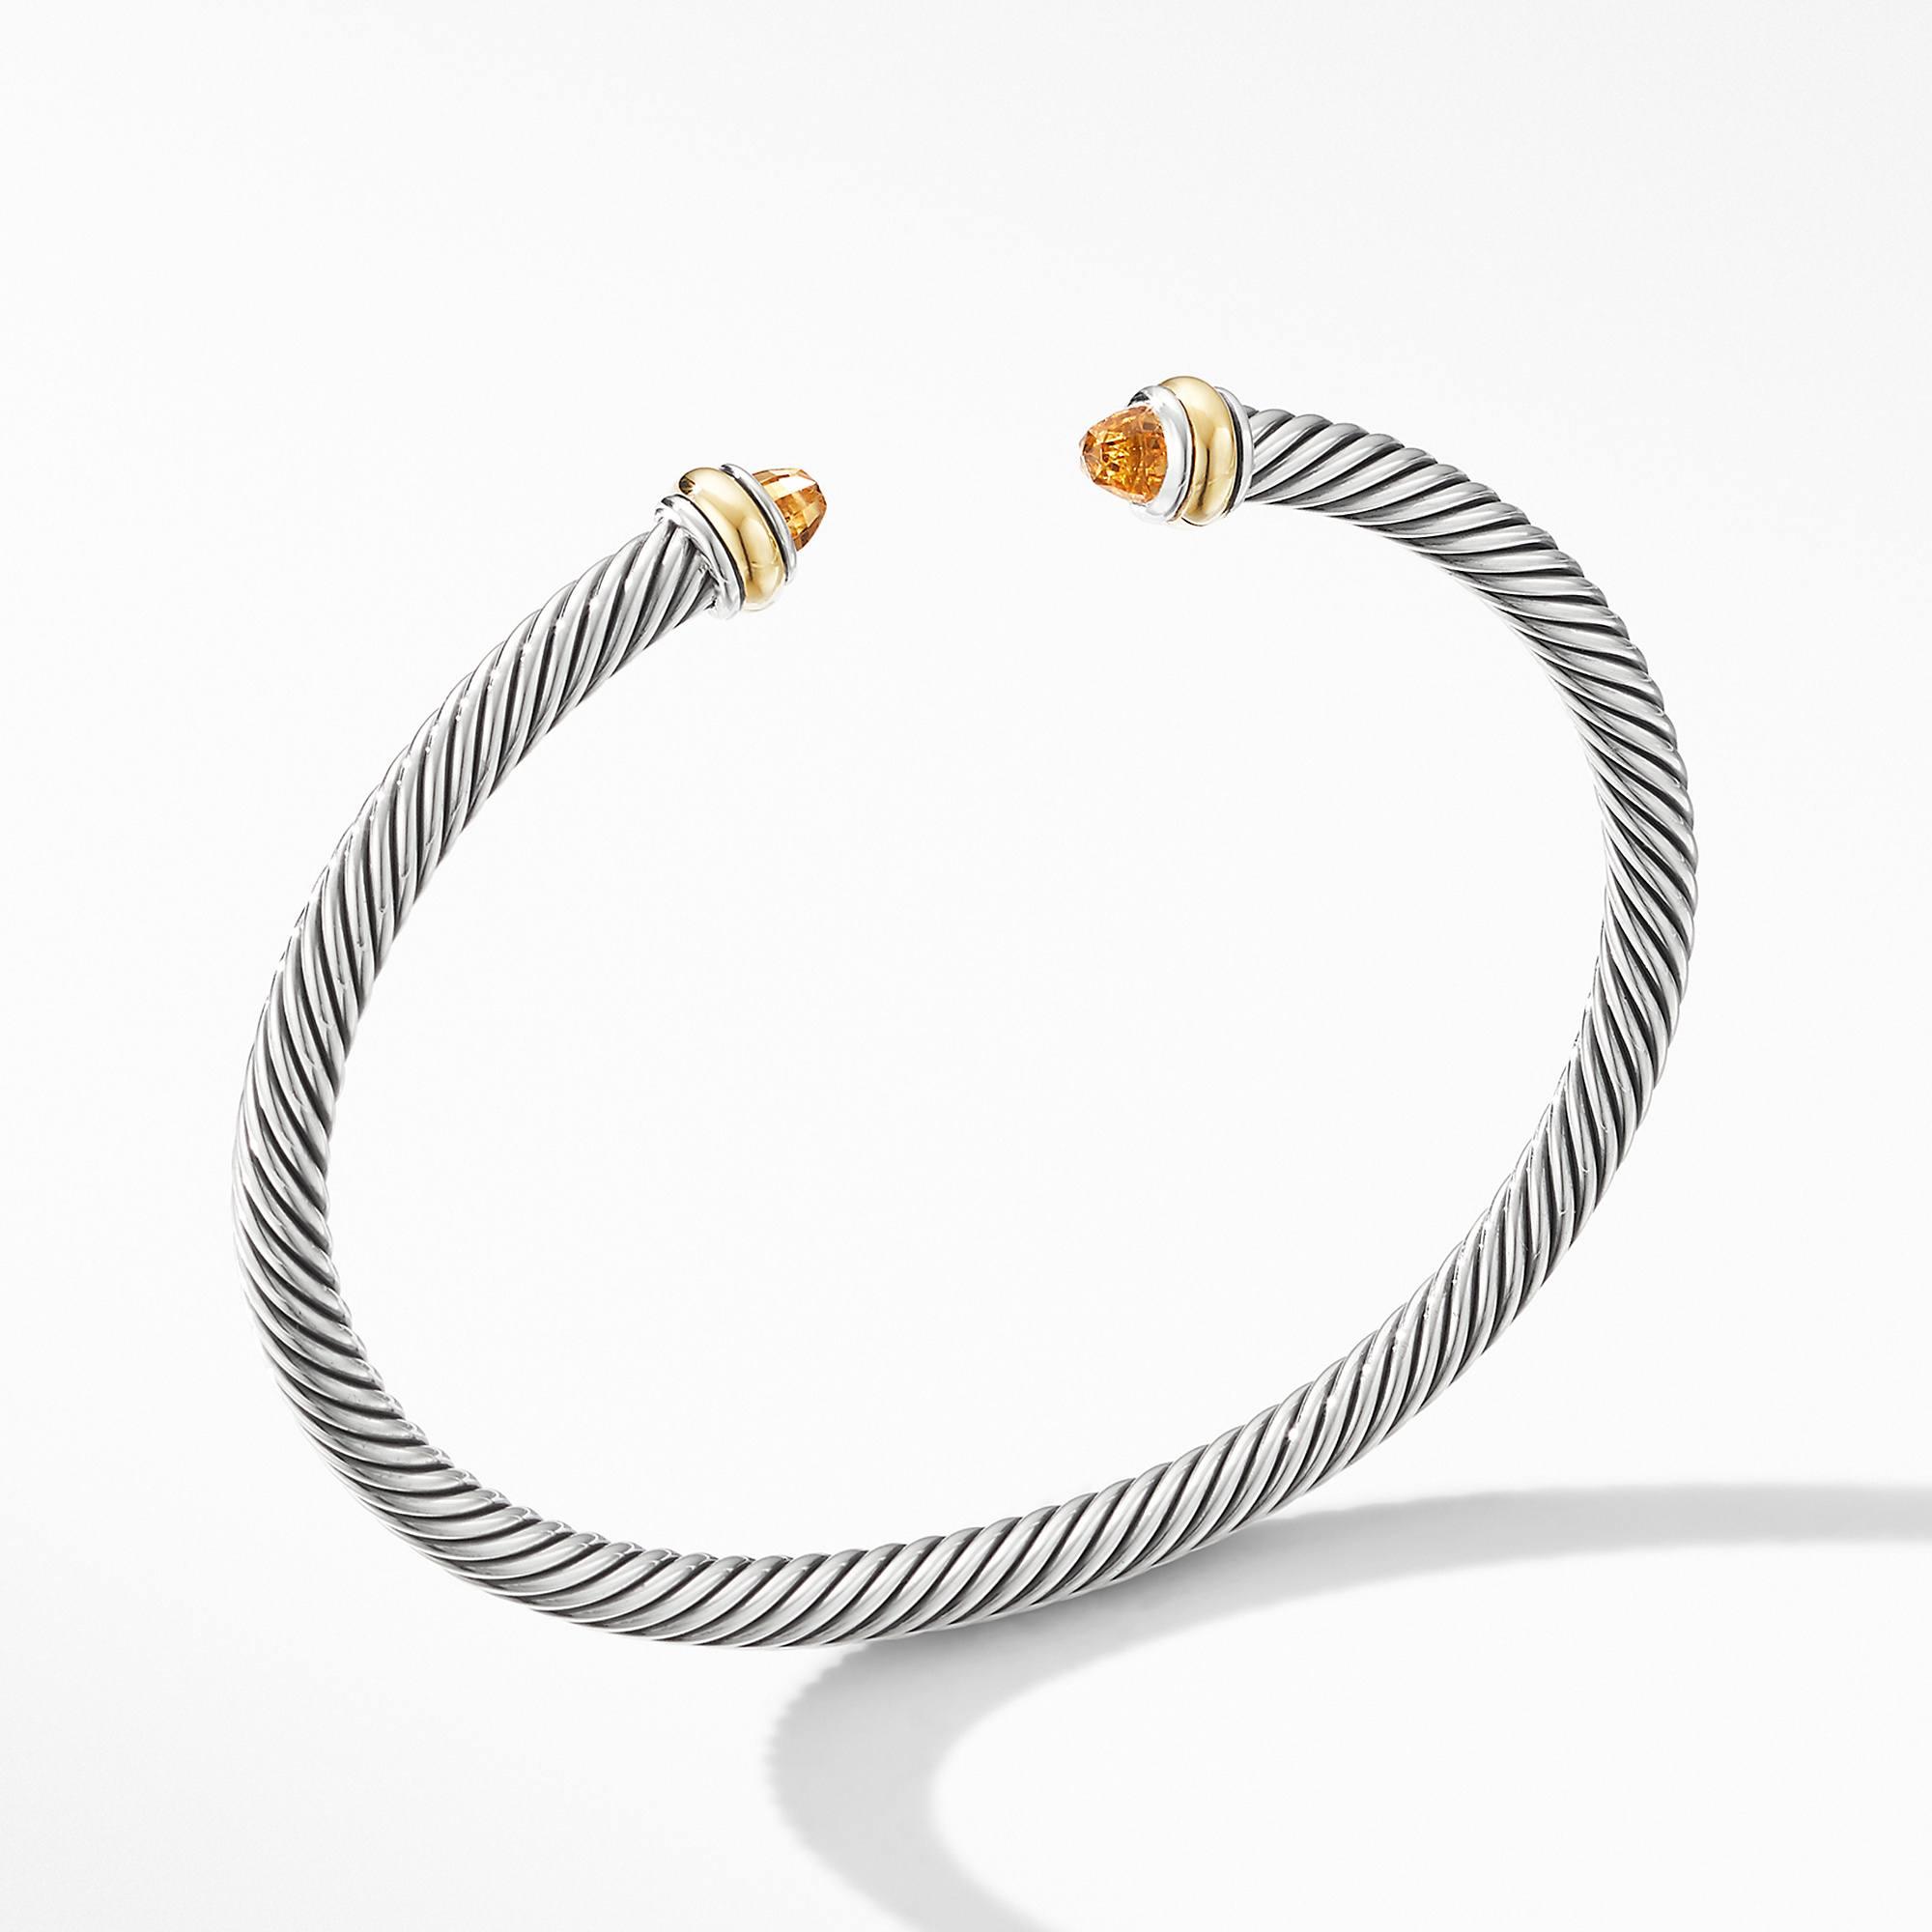 David Yurman Cable Classic Bracelet with Citrine and 18k Yellow Gold, size medium